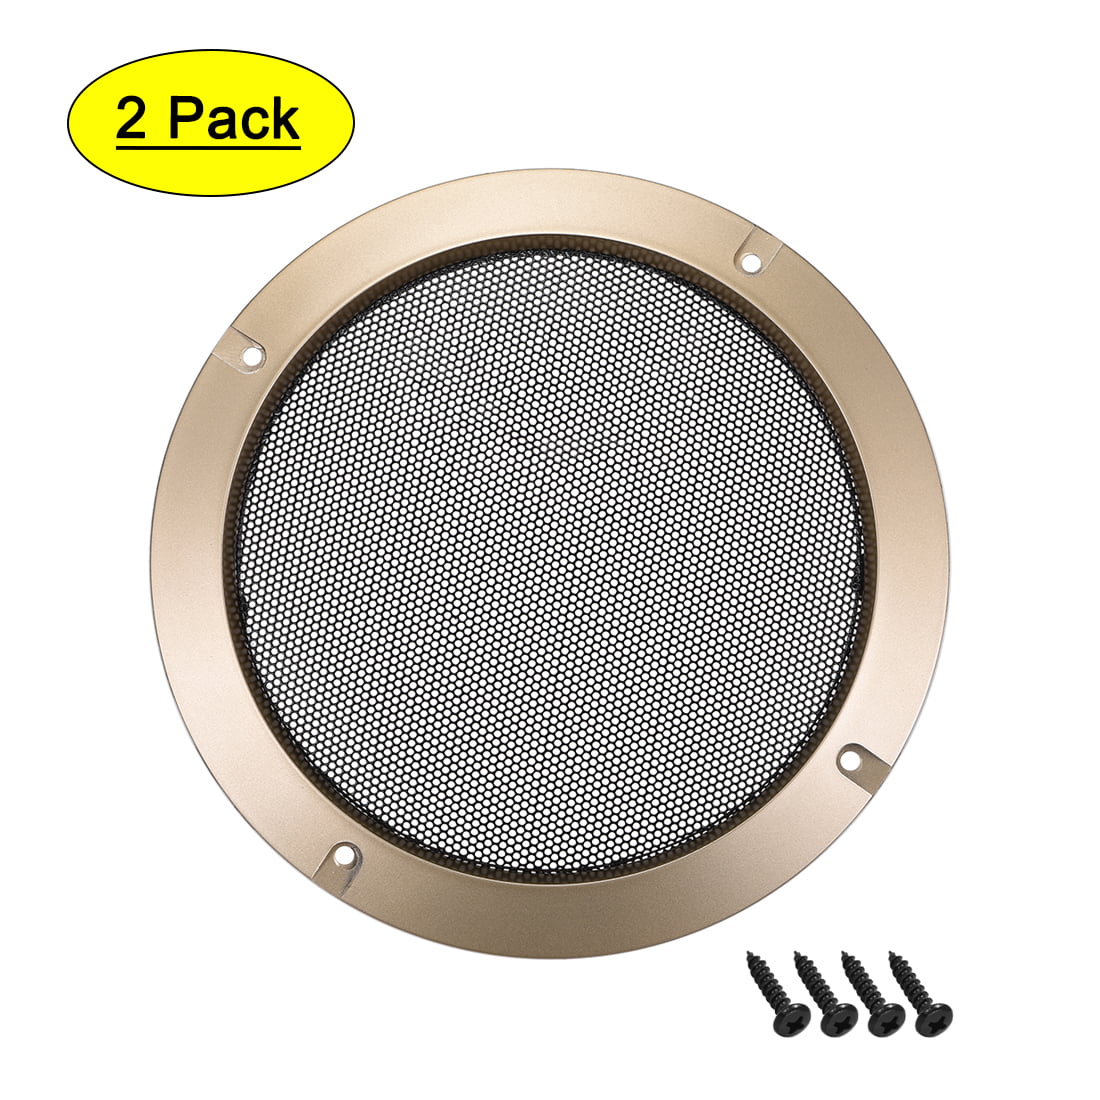 Fielect 10inch /255mm Speaker Grill Mesh Decorative Circle Woofer Guard Protector Cover Audio Accessories Black